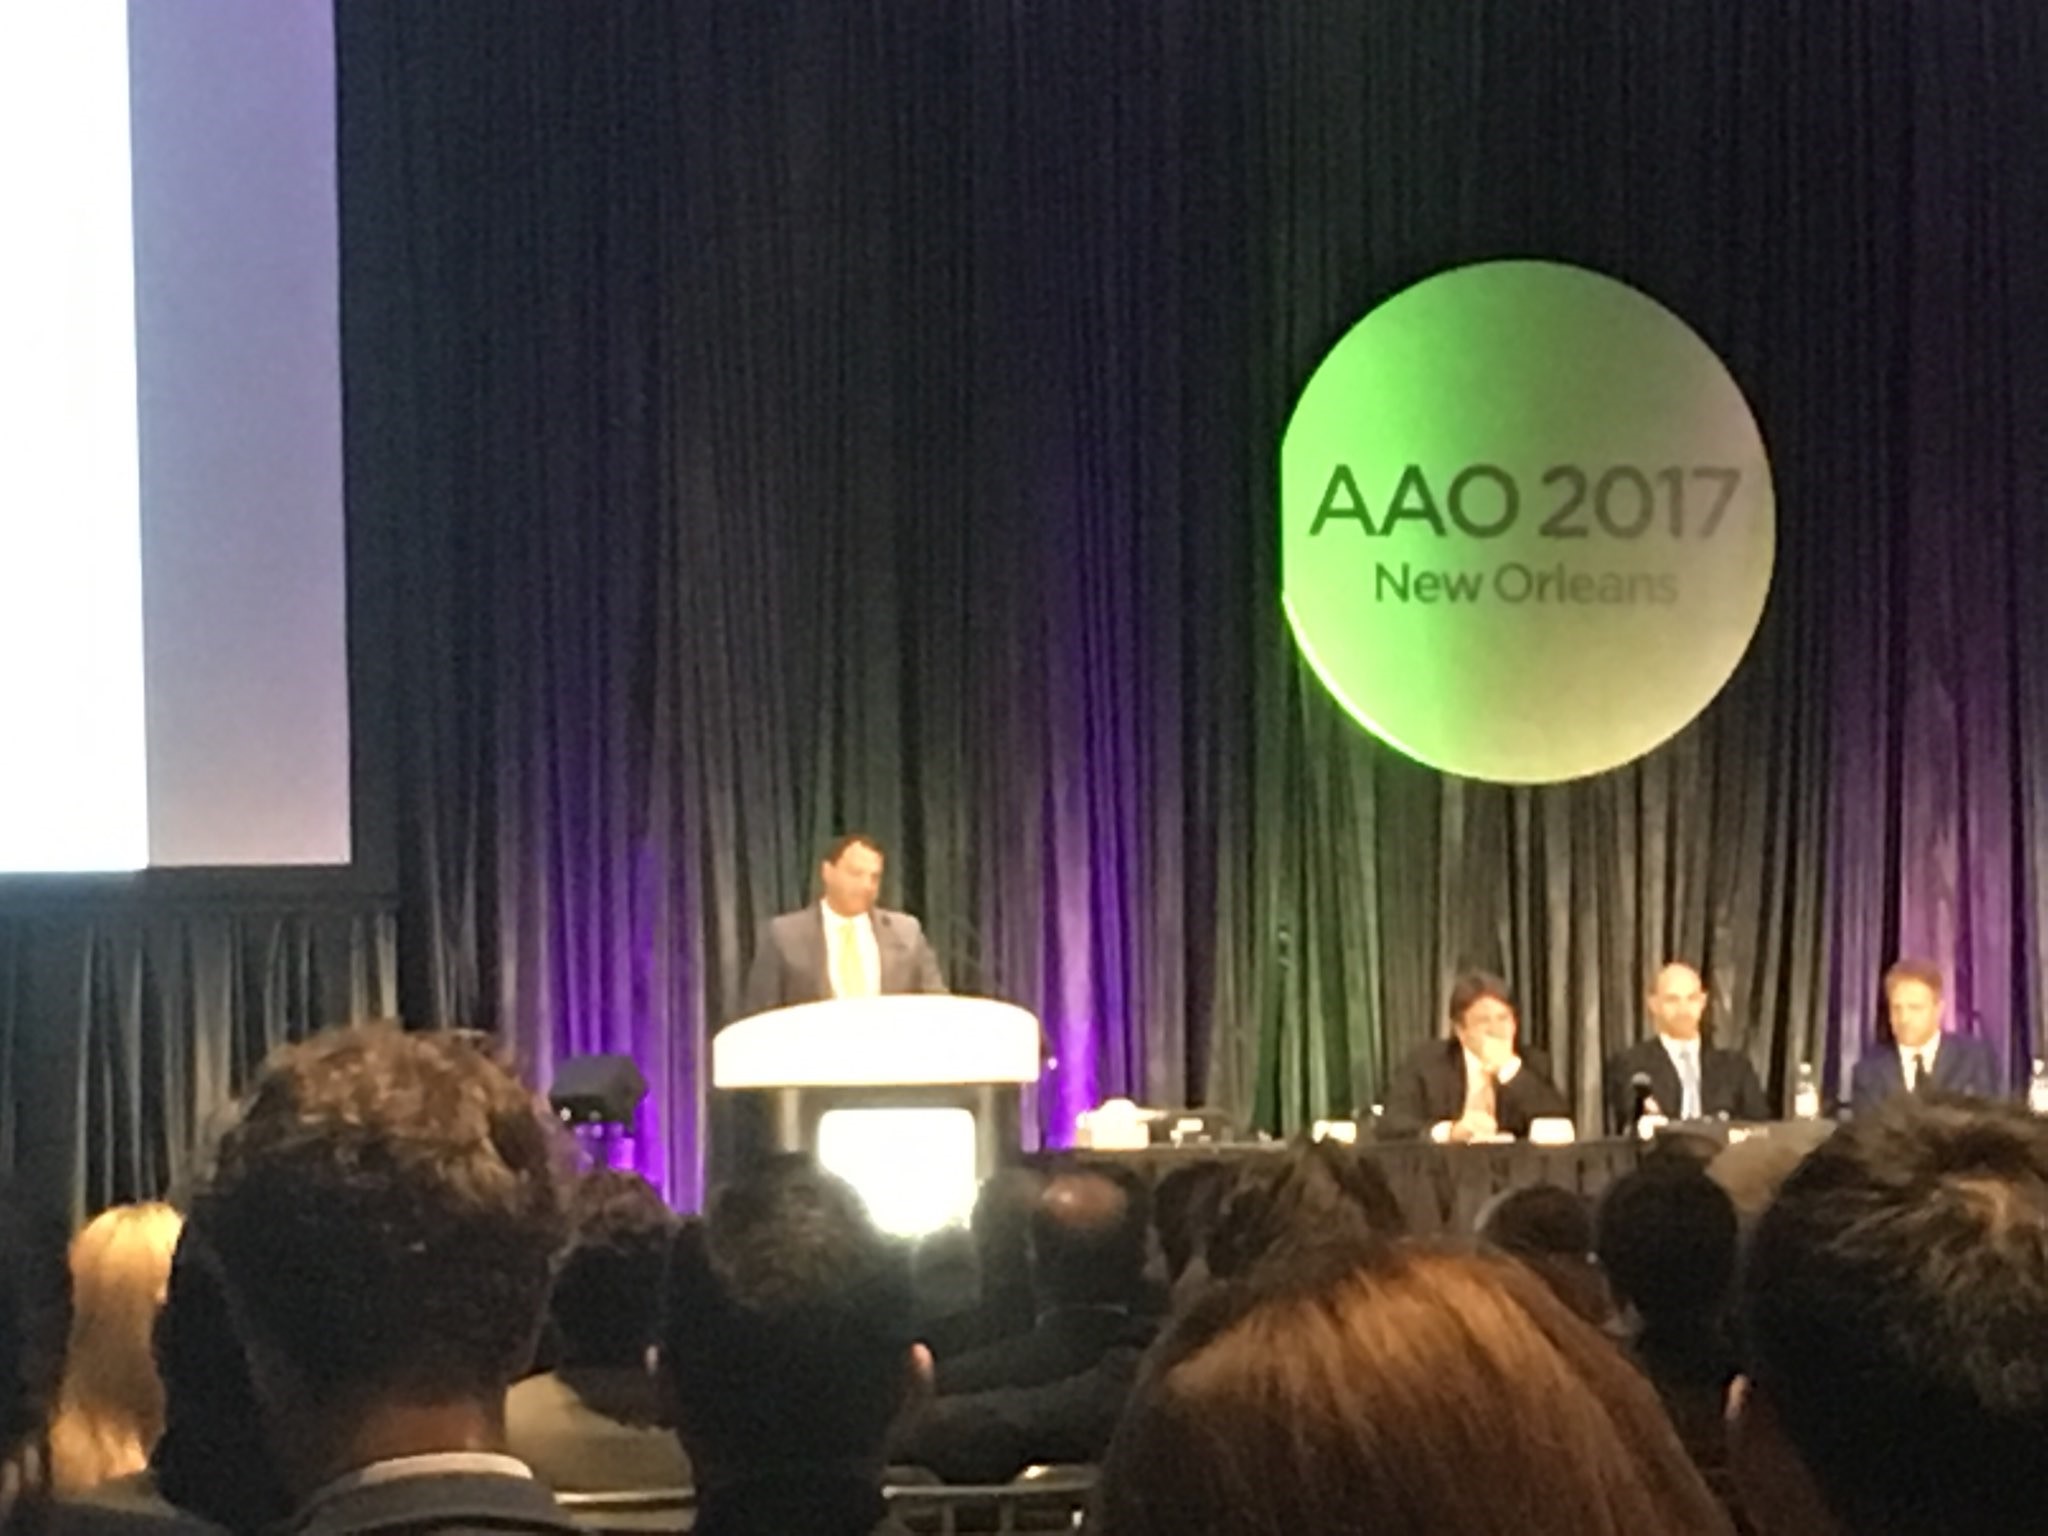 Dr. Laquis at the American Academy of Ophthalmology's annual conference in New Orleans